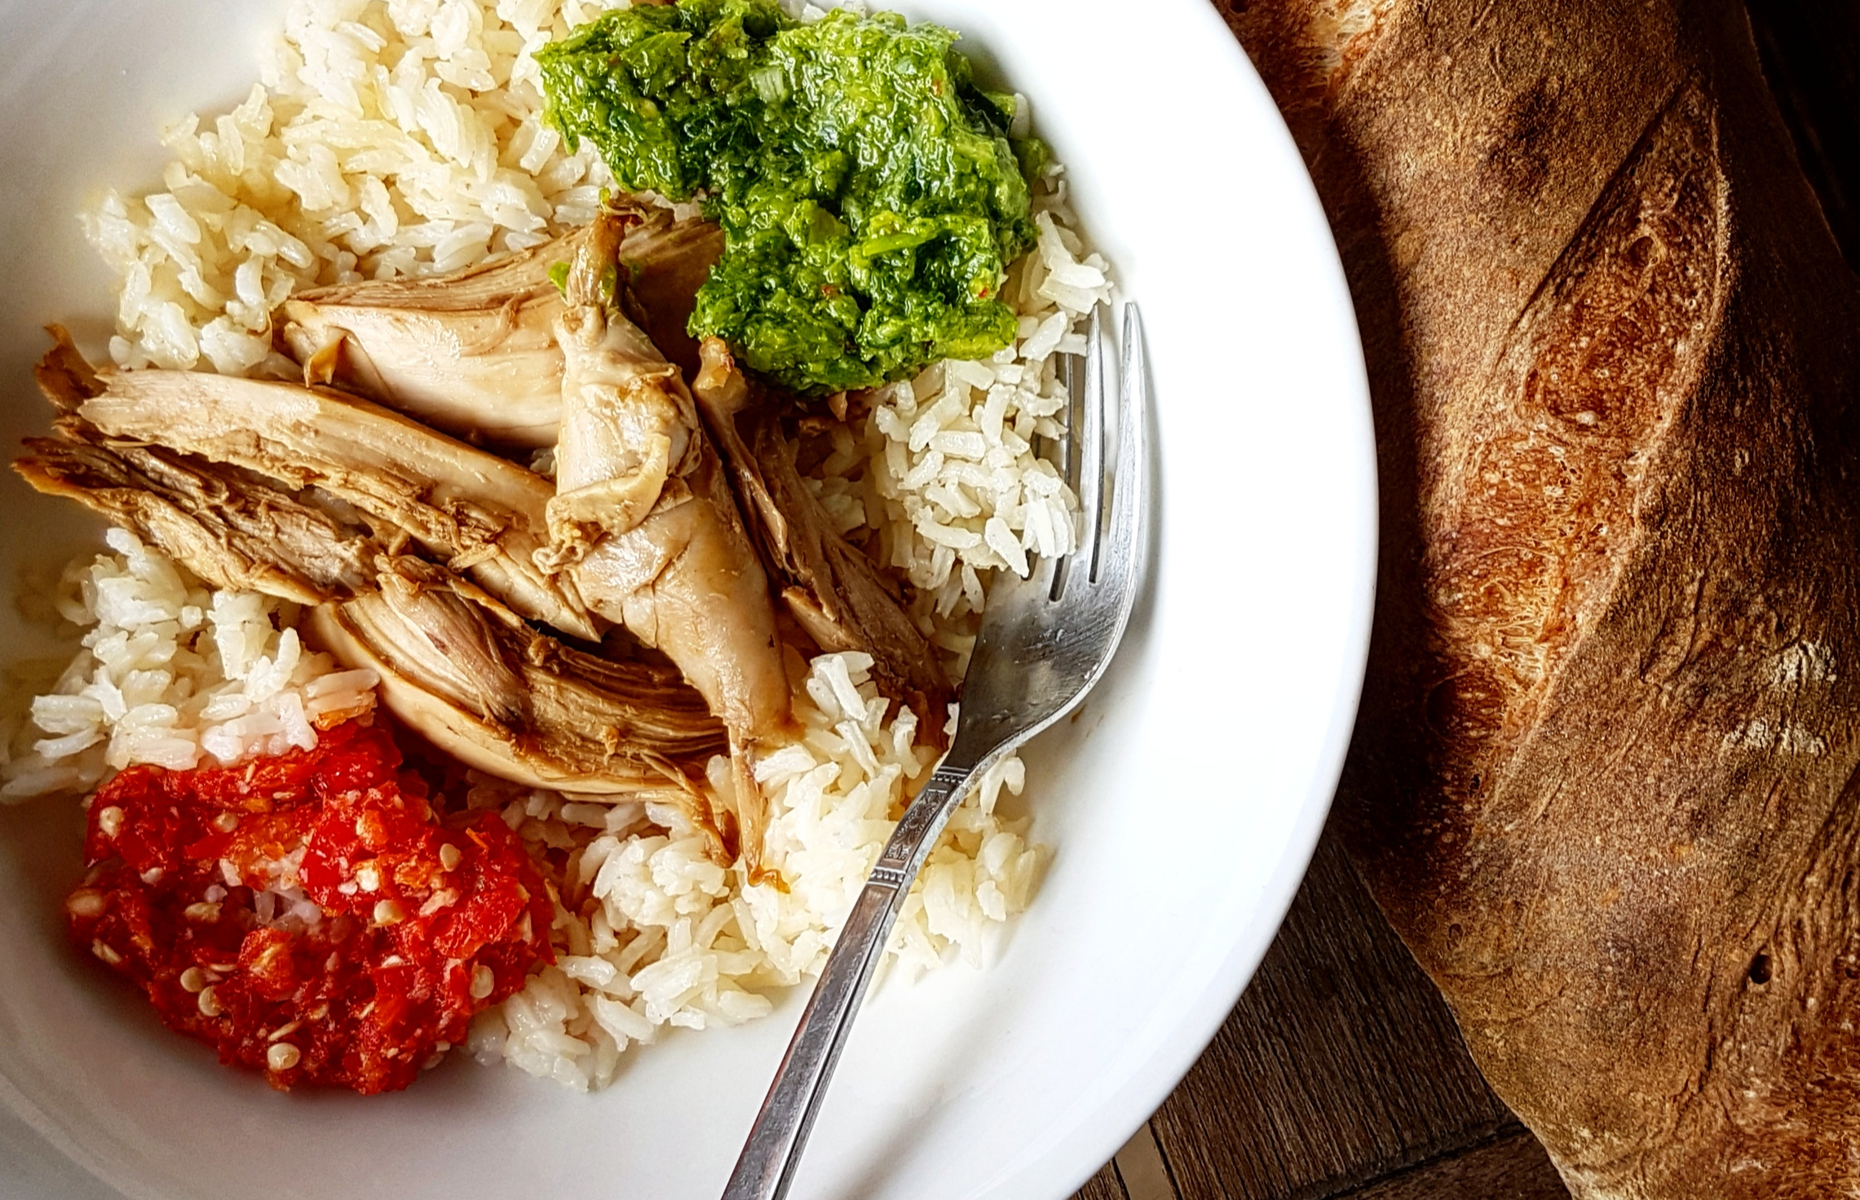 Poached and shredded chicken with rice (Image: yotisot/Shutterstock)